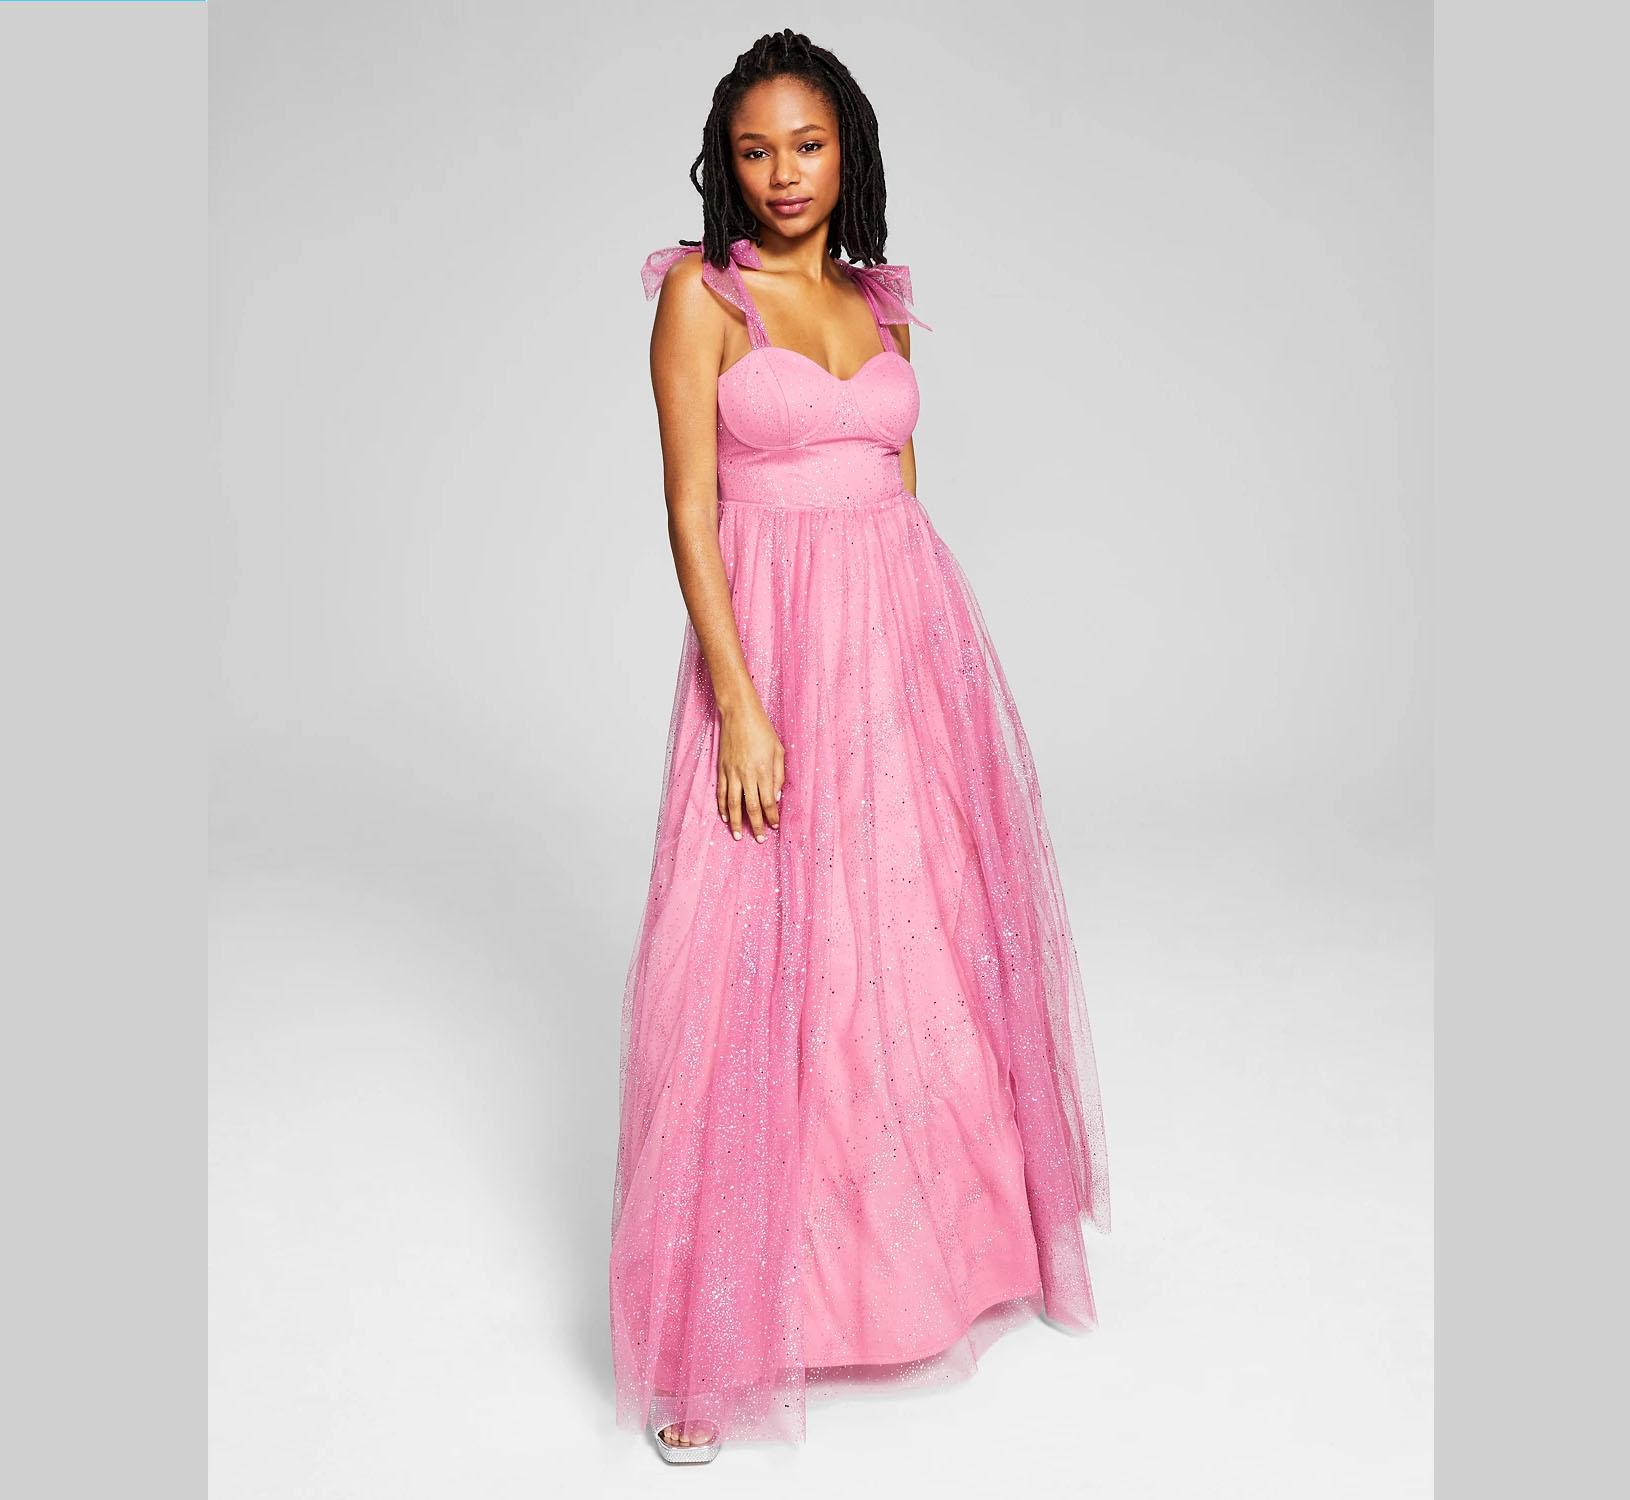 13 Prom Dress Styles That’ll Make Your Look Stand Out